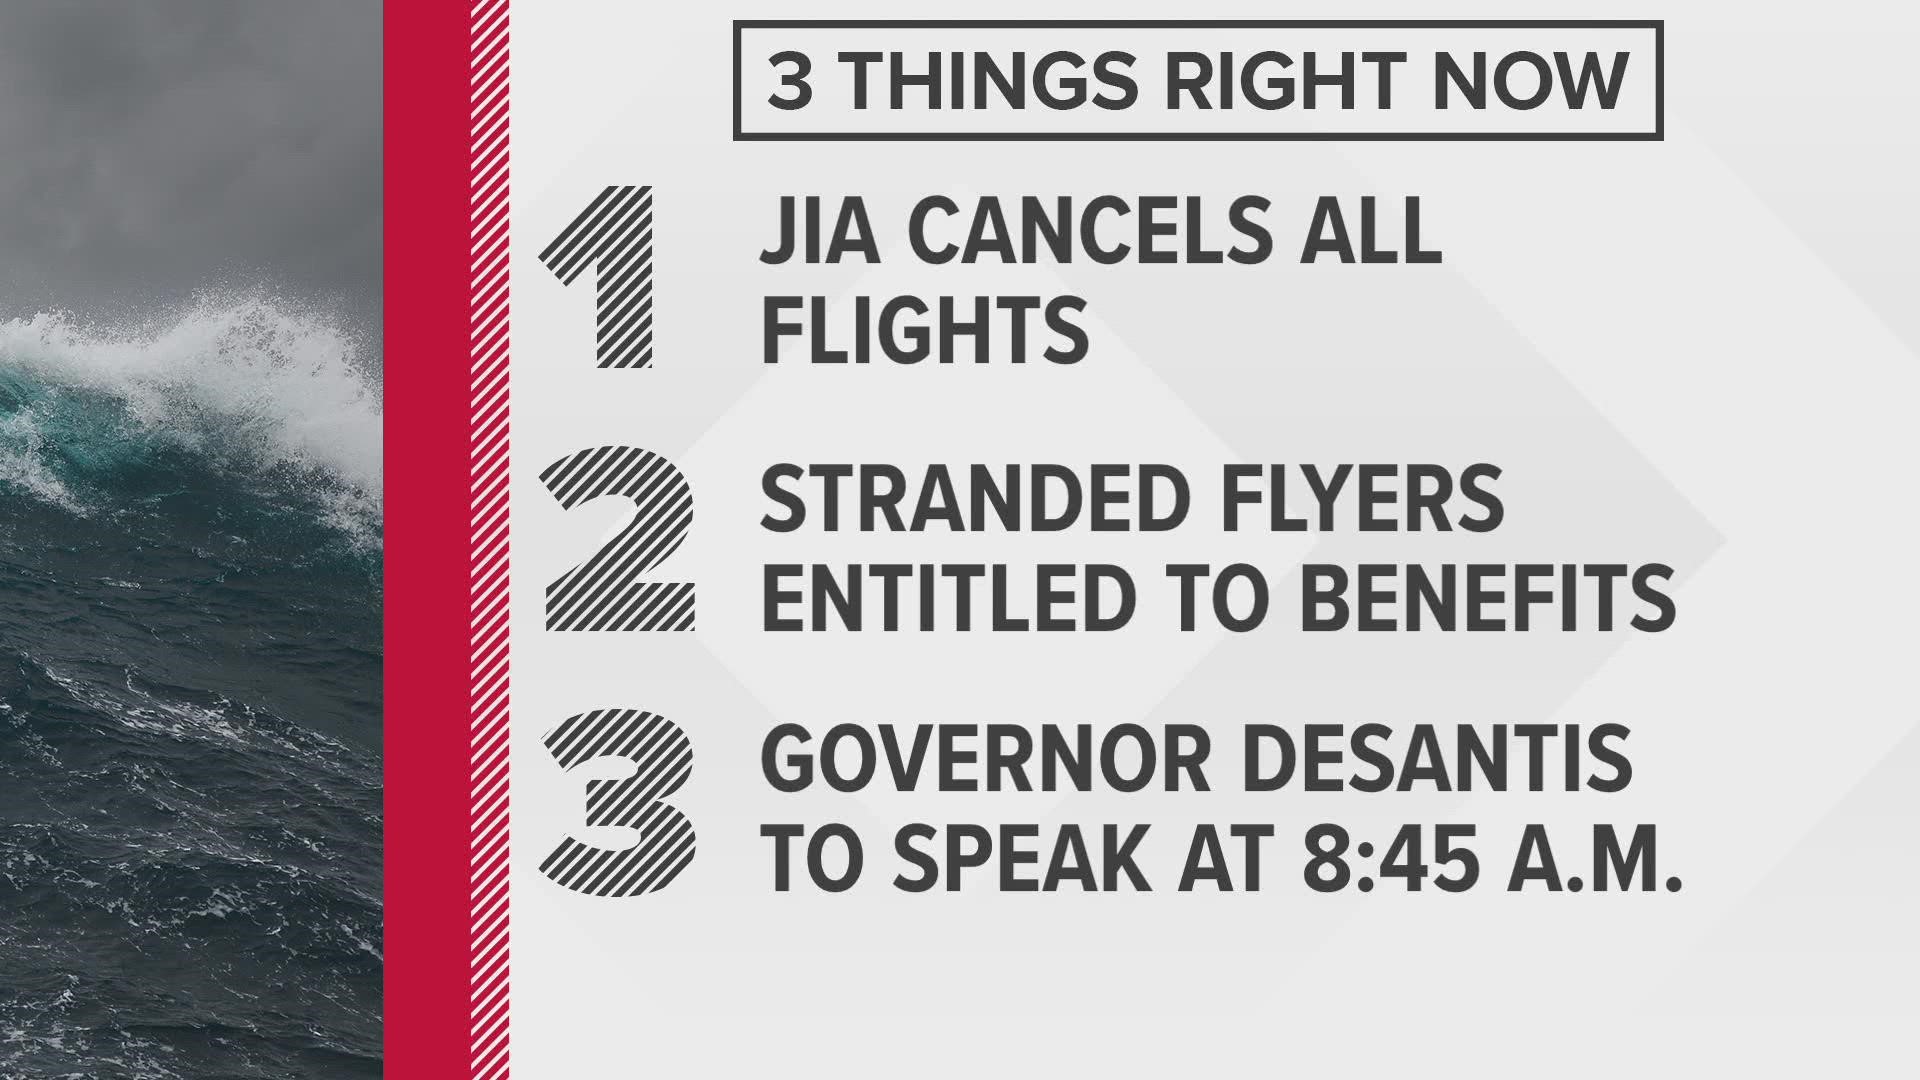 All flights out of JIA have been cancelled Thursday.